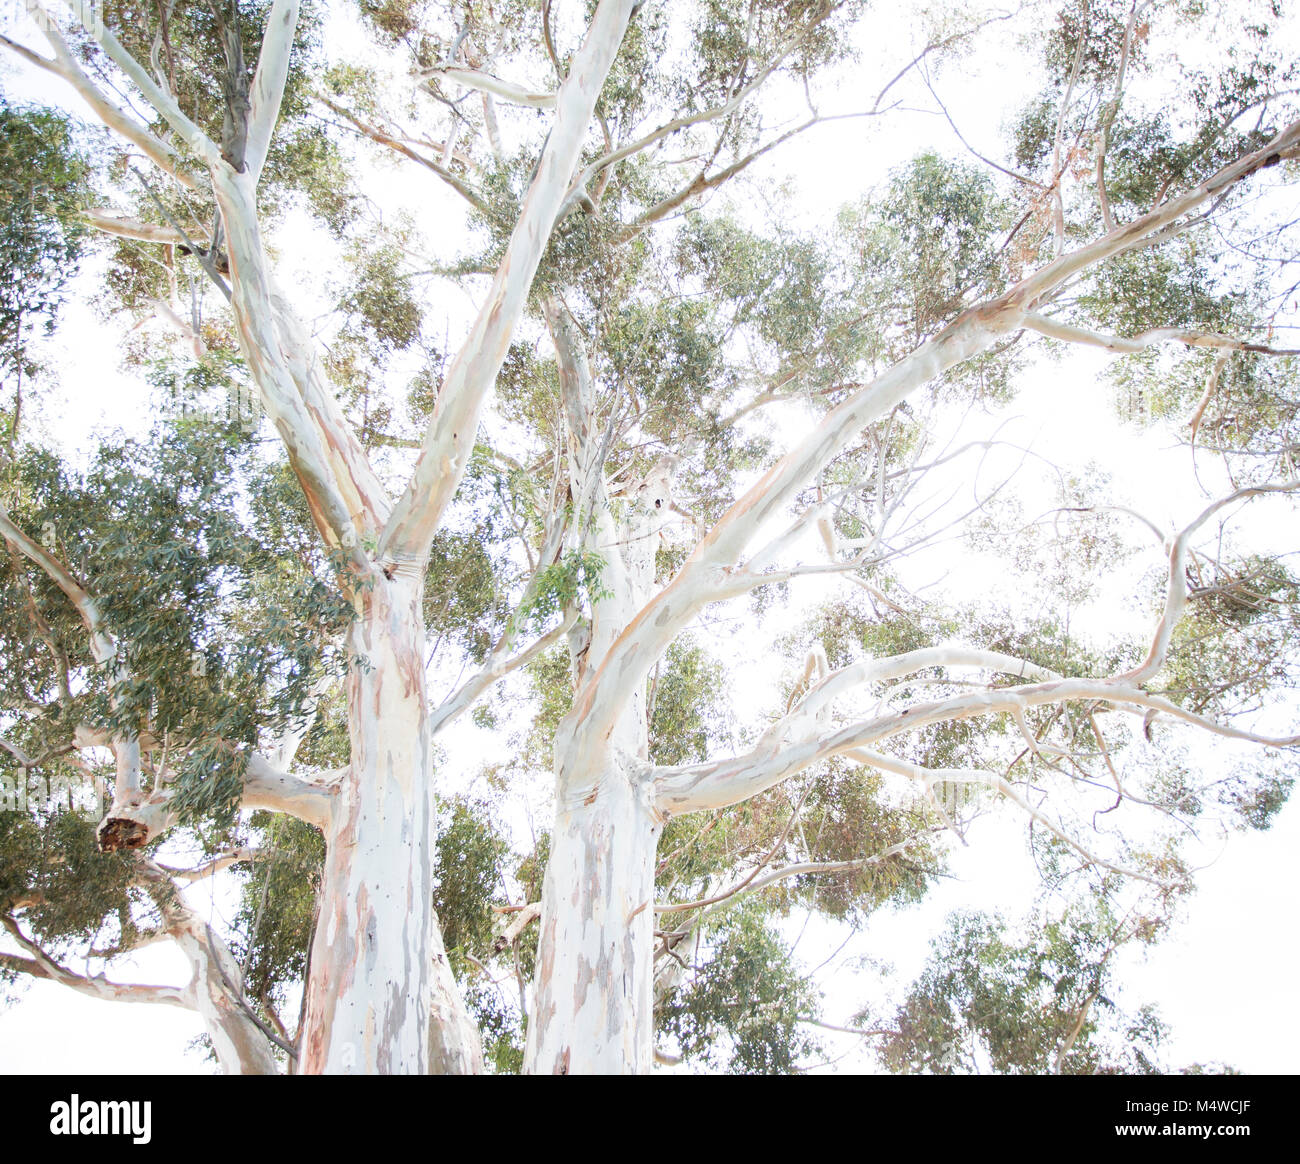 A blue gum tree in Matjiesfontein, South Africa Stock Photo